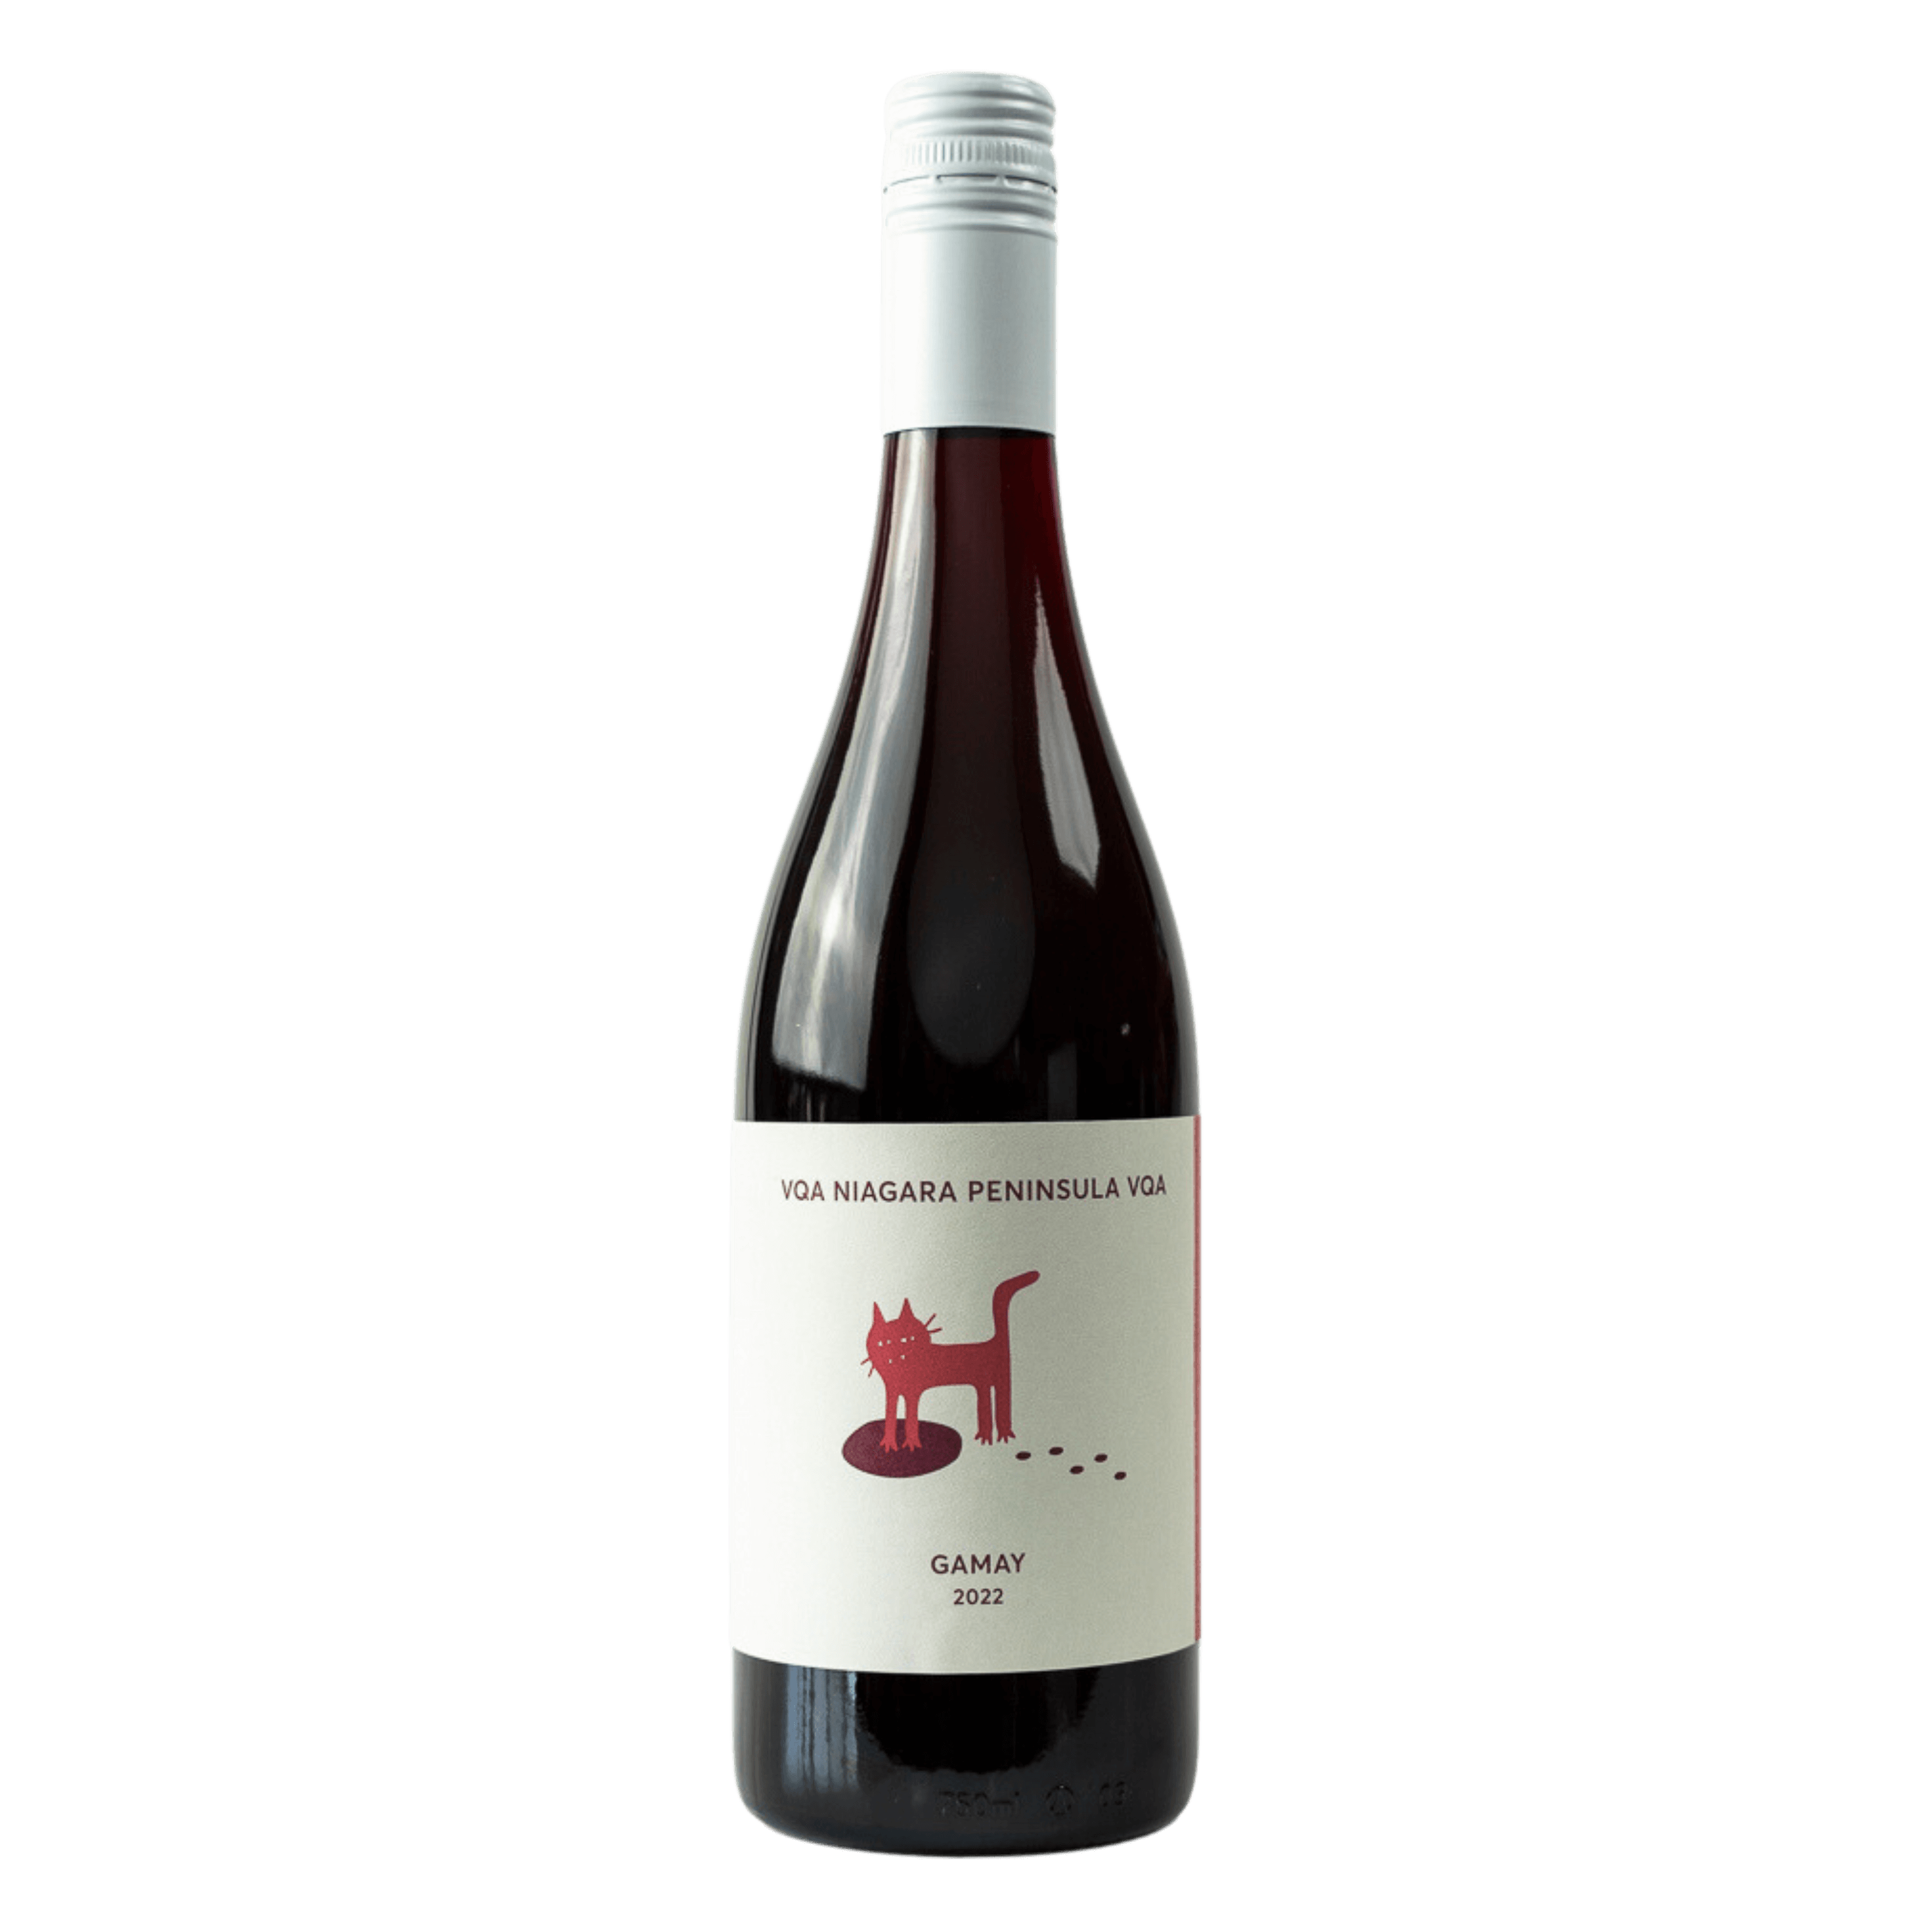 Bundle pack of red merlot gamay baco carbenet franc natural wines from Traynor Family Vineyard a winery in Prince Edward County, Ontario